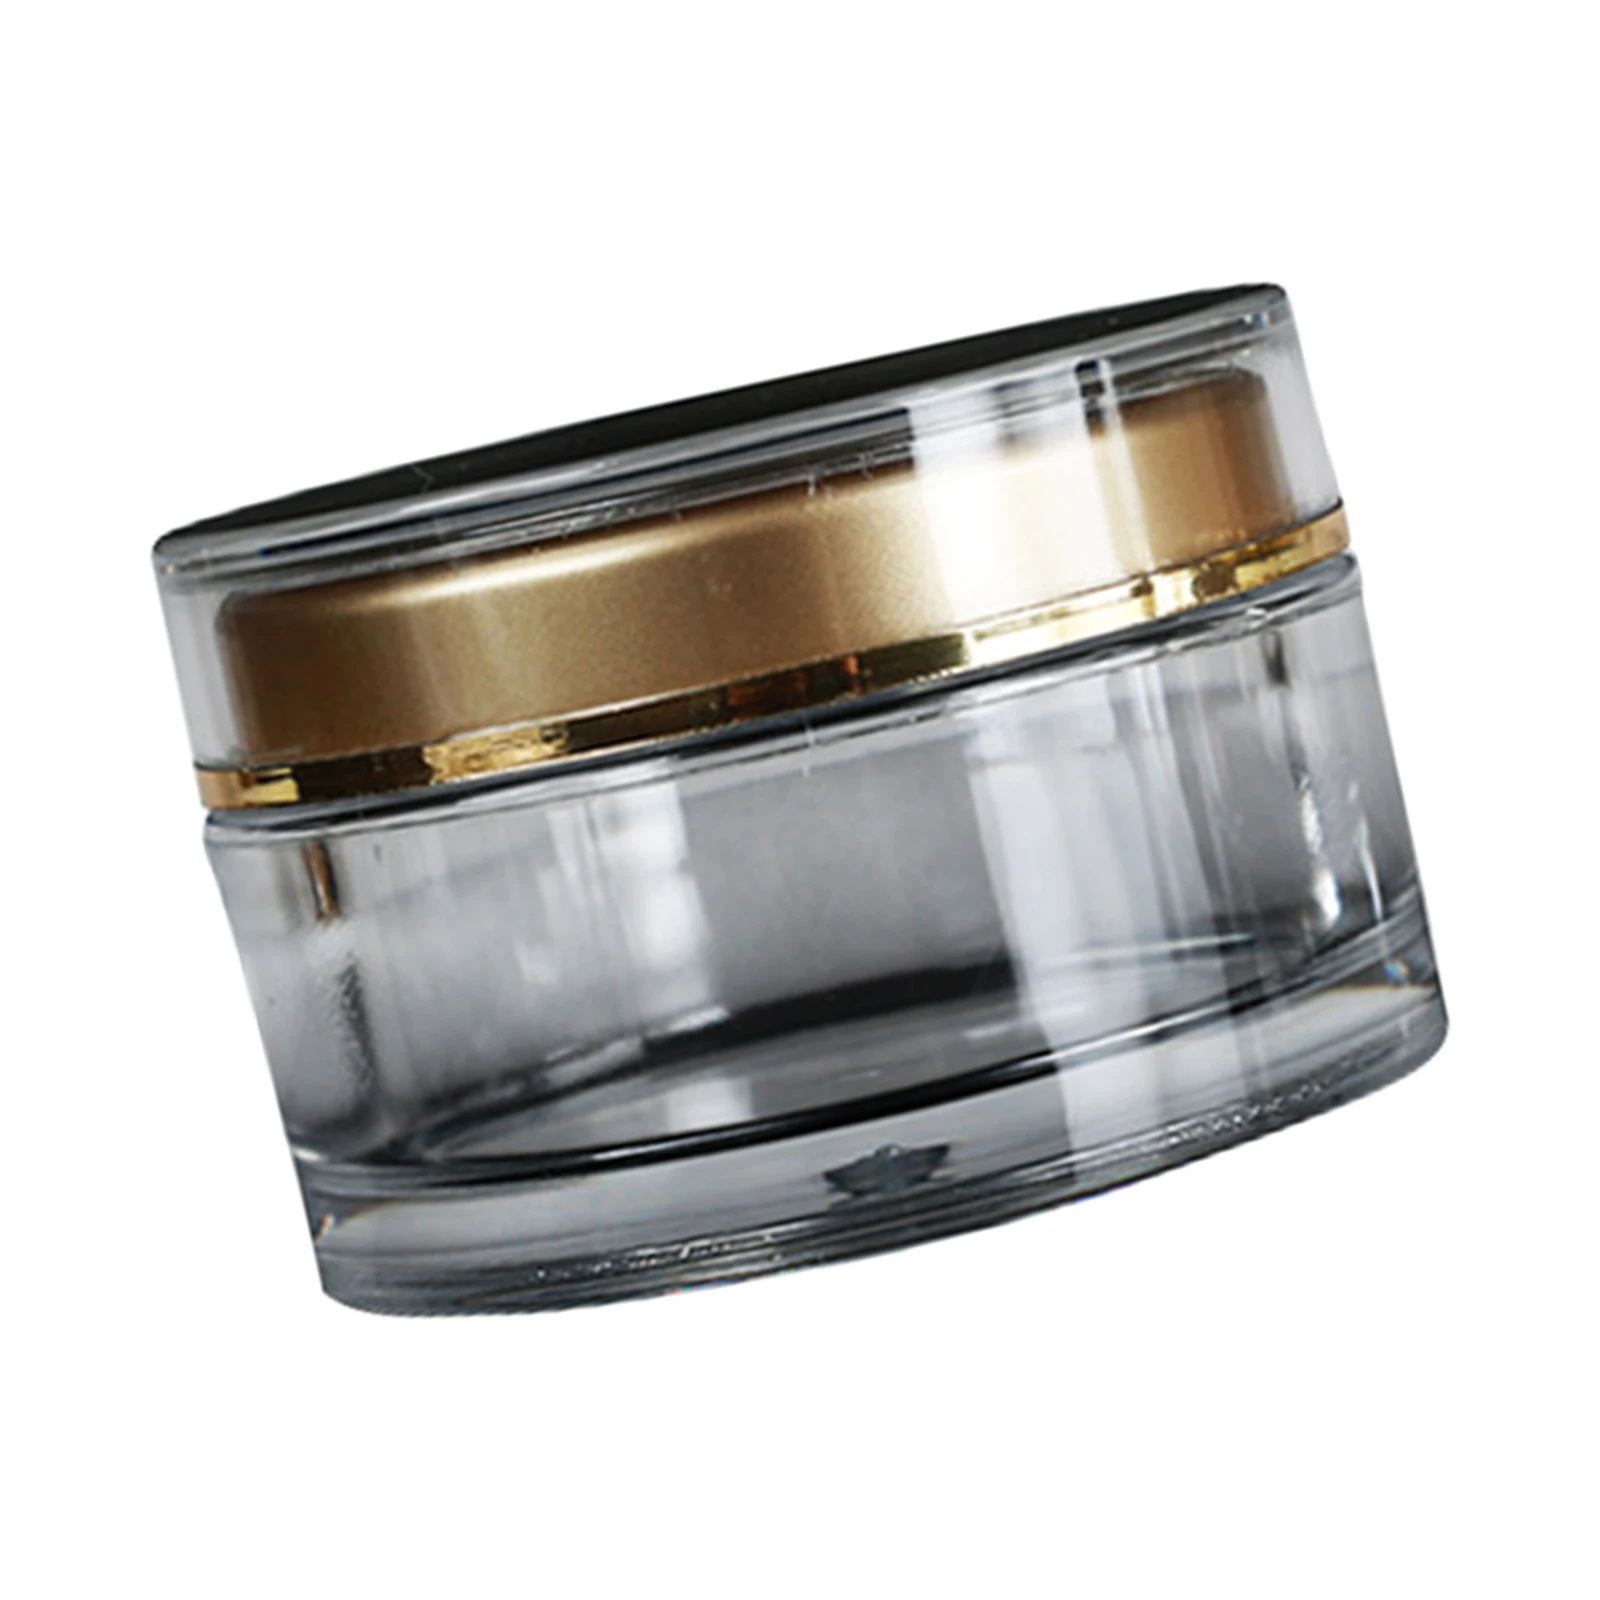 Cosmetic Jars Acrylic Clear Small Empty Tiny Round Flat Top Sample Pot for Makeup Nails Ointment Powdered Jewelry